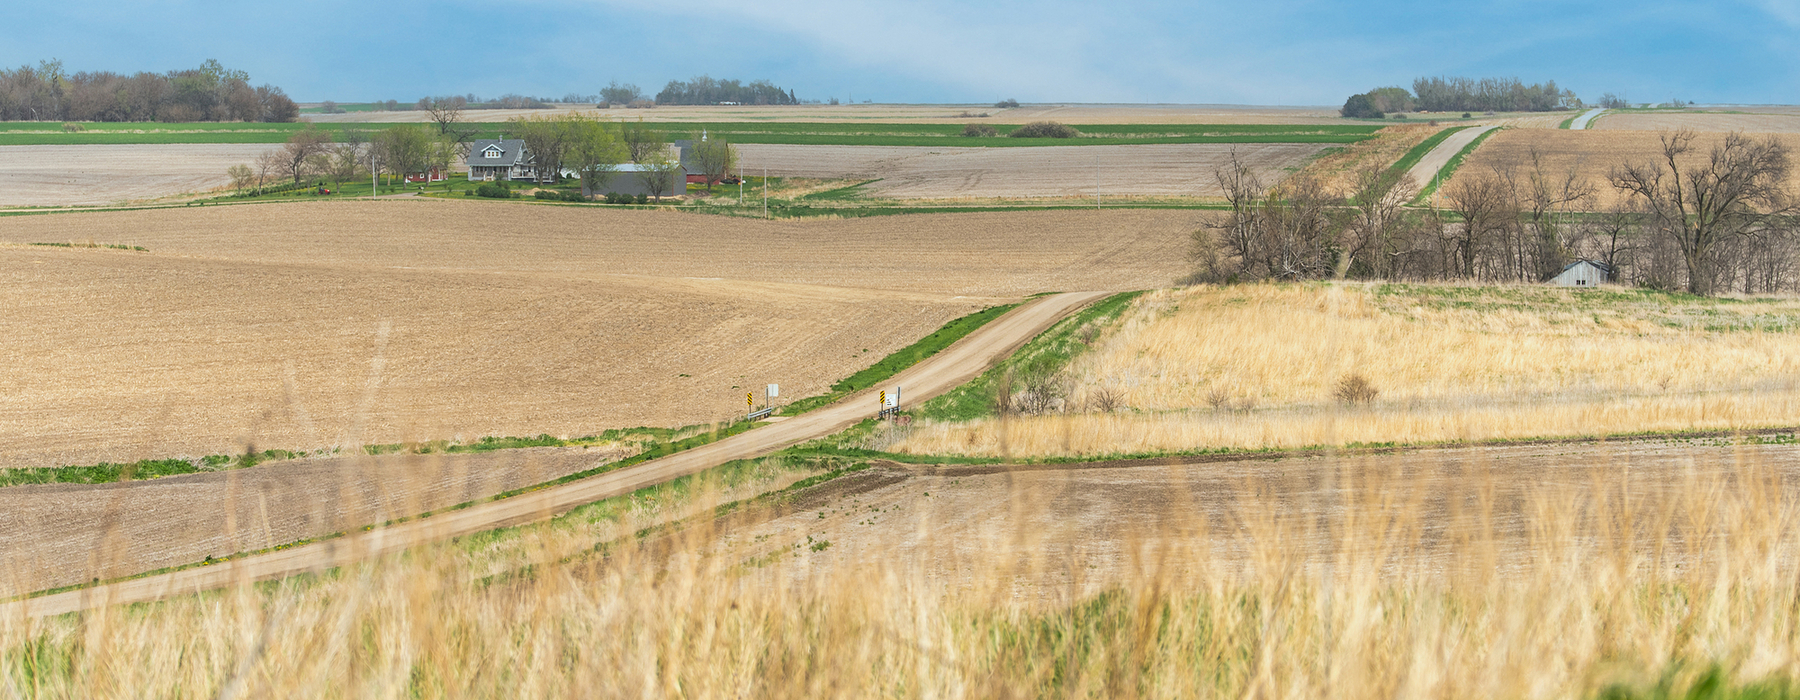 Rural gravel road with fields and homesteads on each side